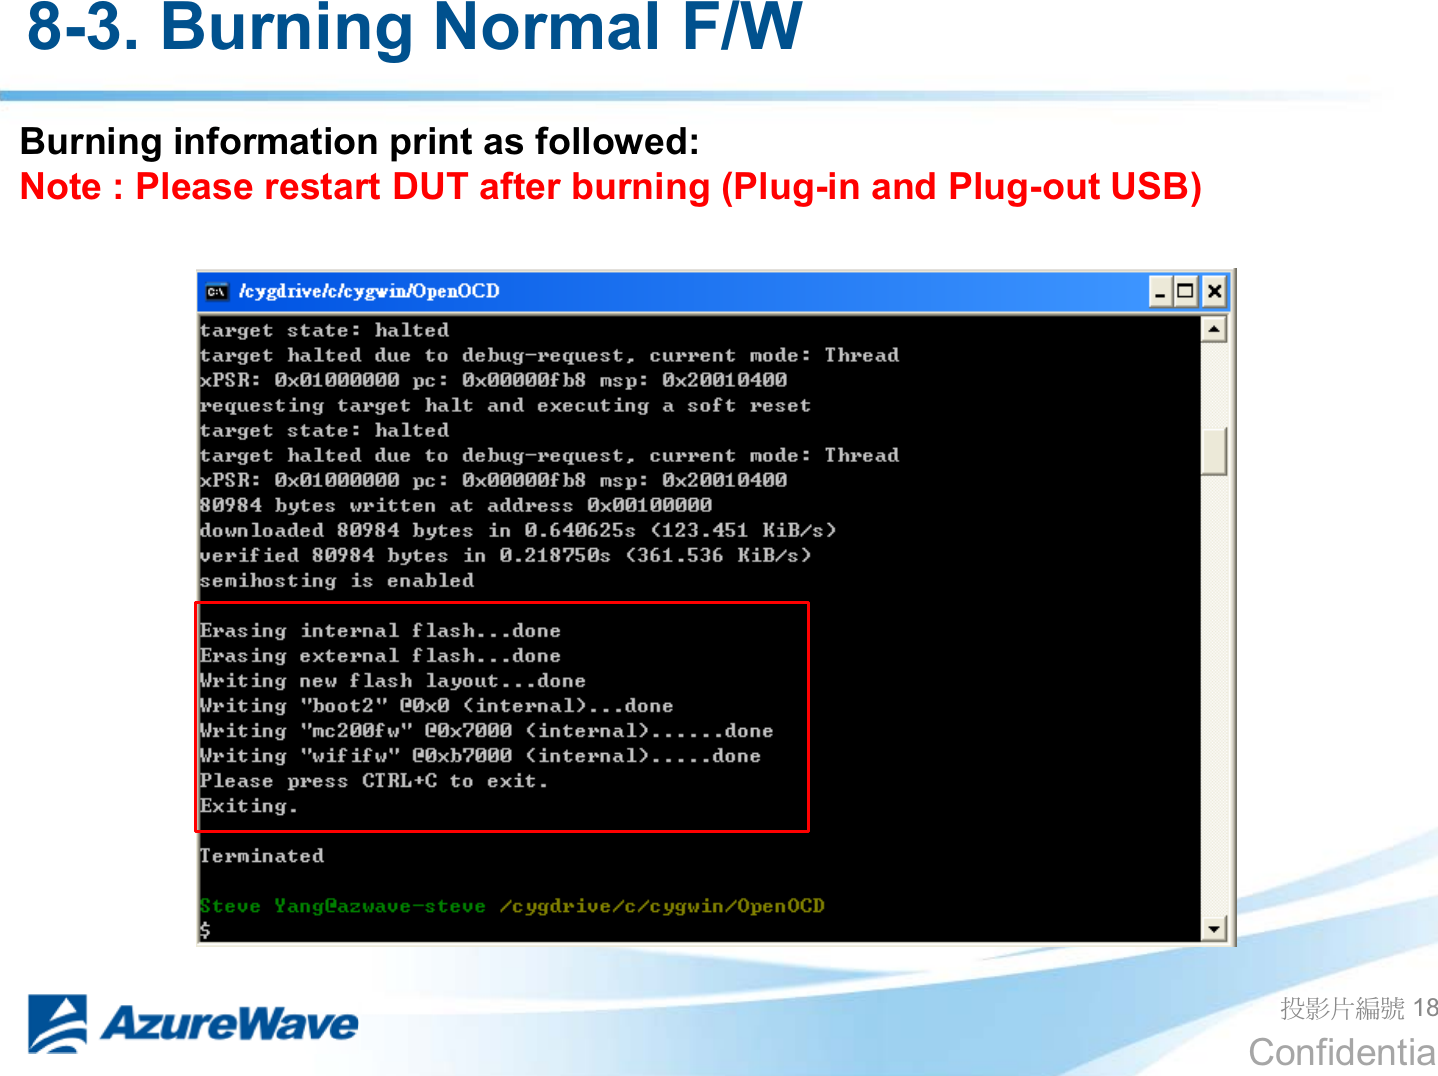 Confidential ދᐙׂᒳᇆ 18 Burning information print as followed: Note : Please restart DUT after burning (Plug-in and Plug-out USB) 8-3. Burning Normal F/W 